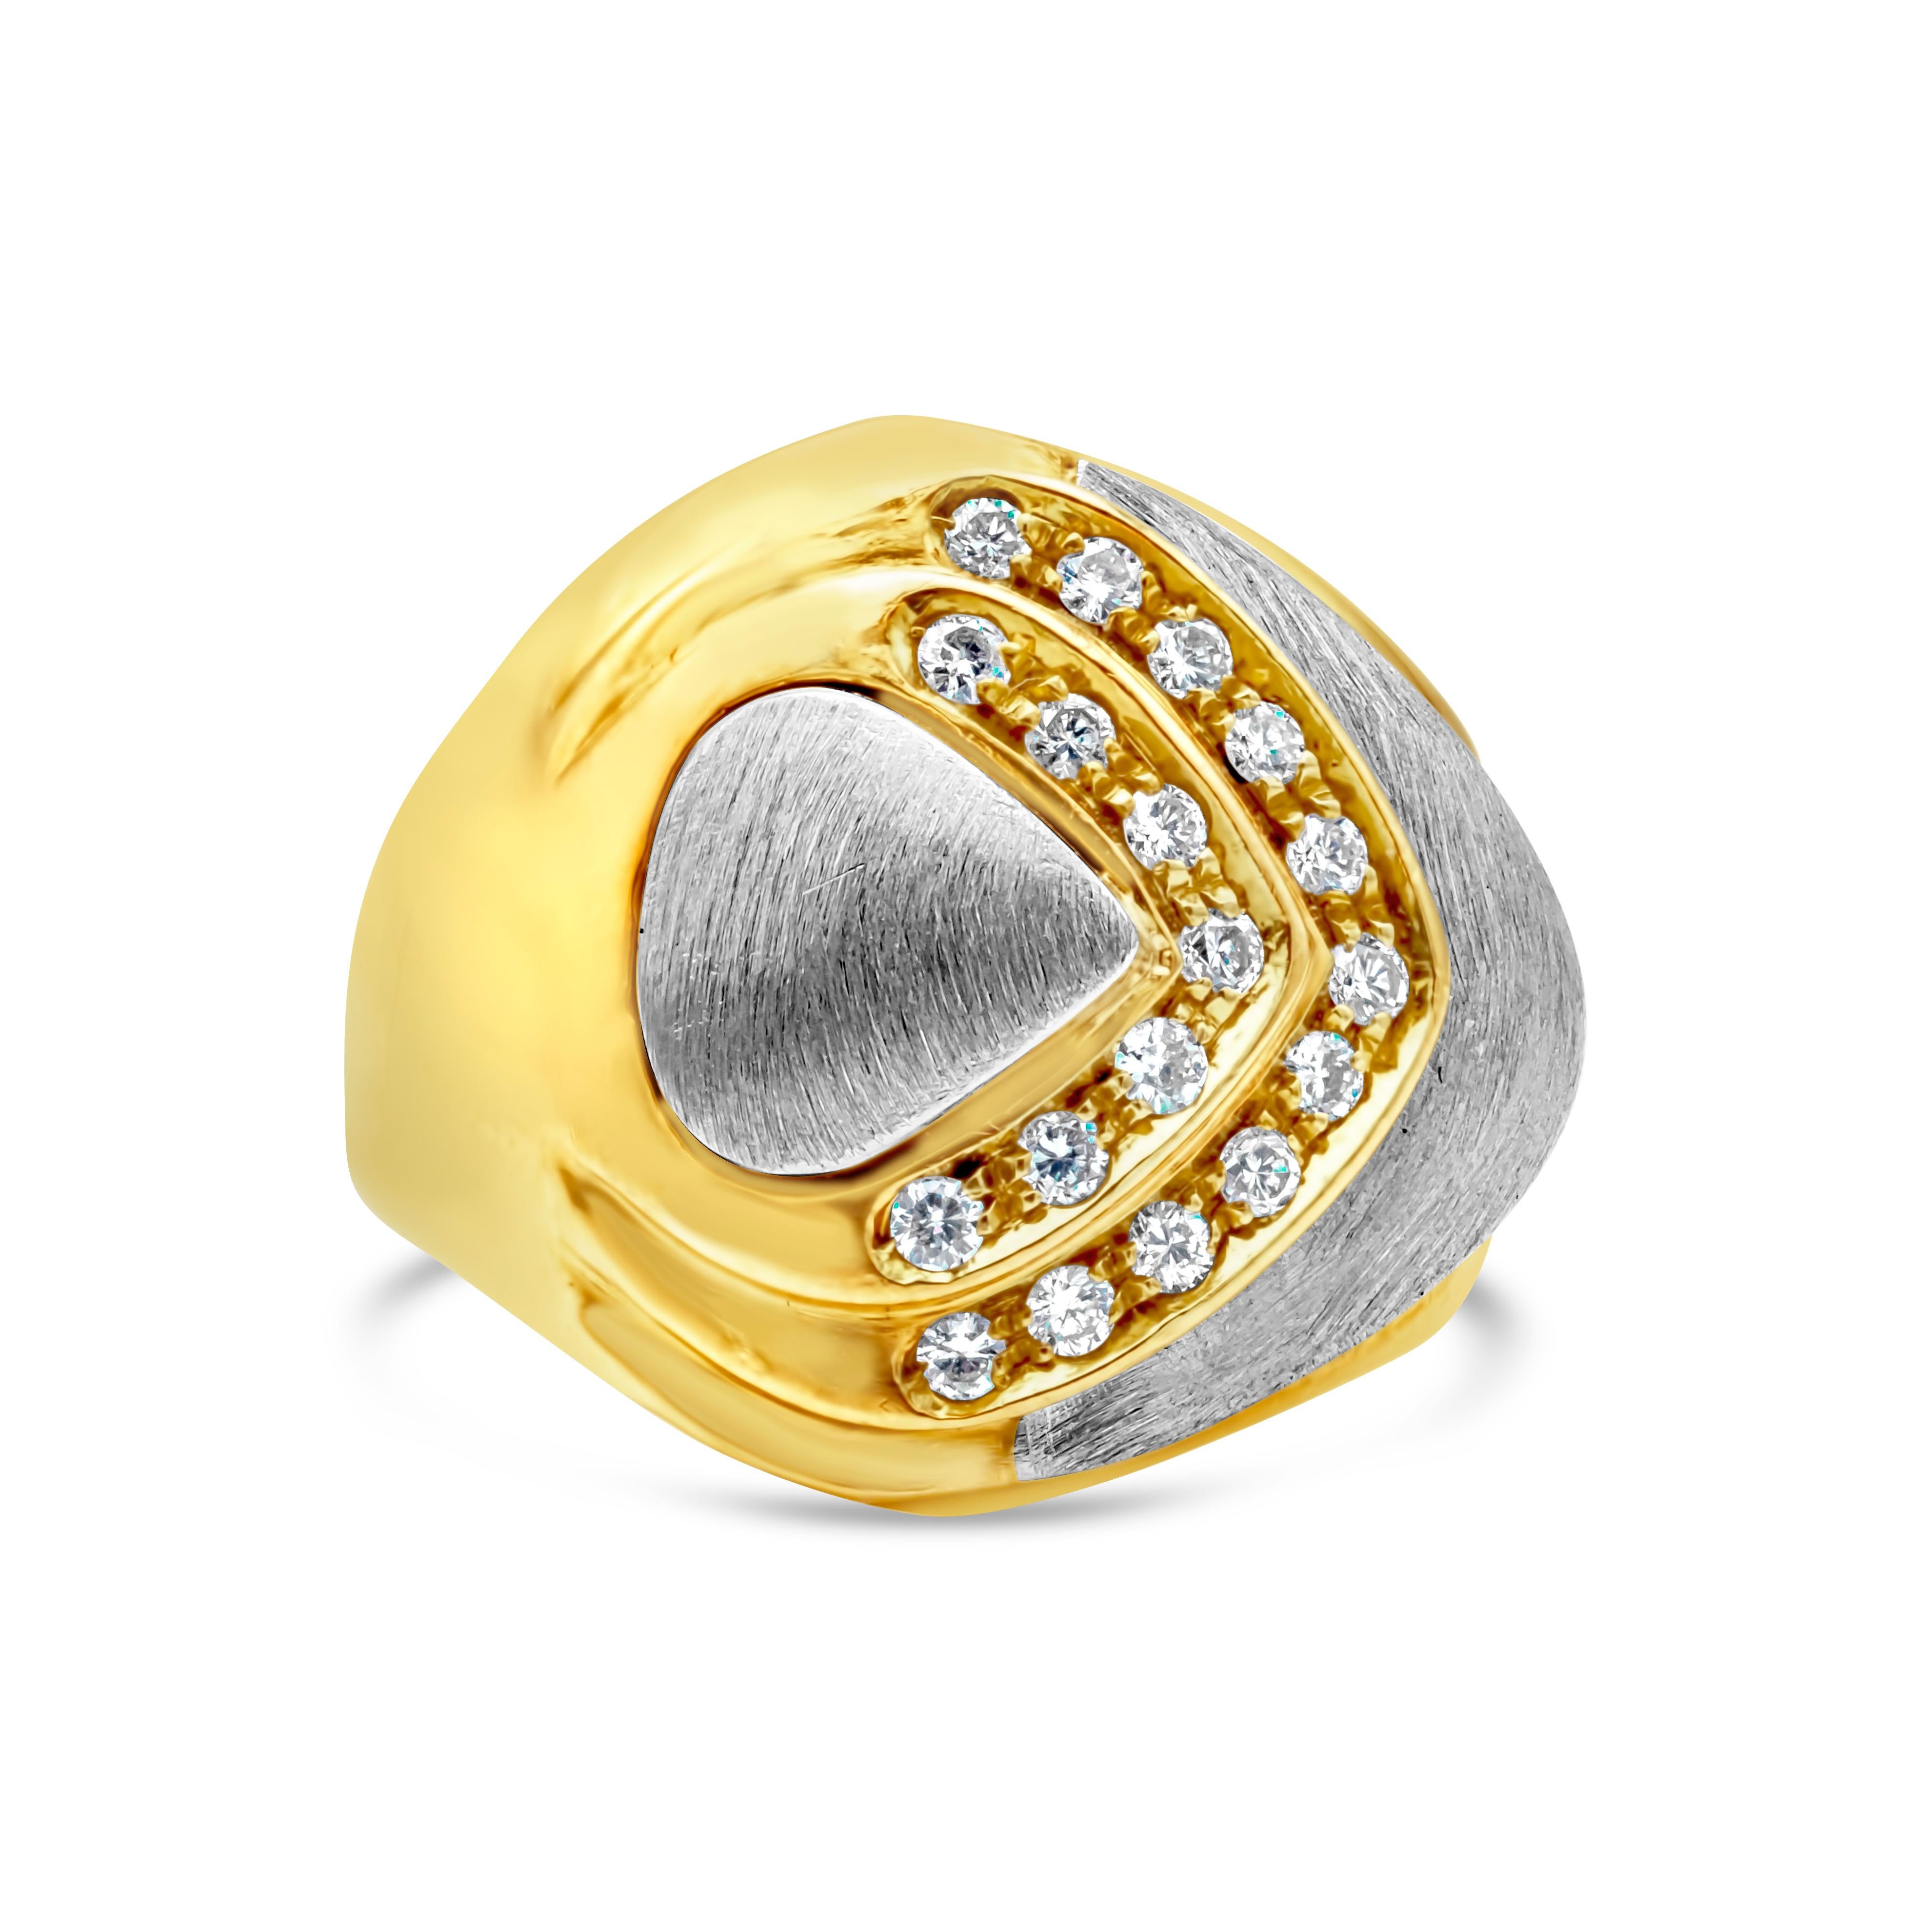 A fashionable vintage ring showcasing round brilliant diamonds weighing 0.27 carats total, set in an 18 karat domed yellow gold setting accented with brushed white gold design. Size 6.75 US.


